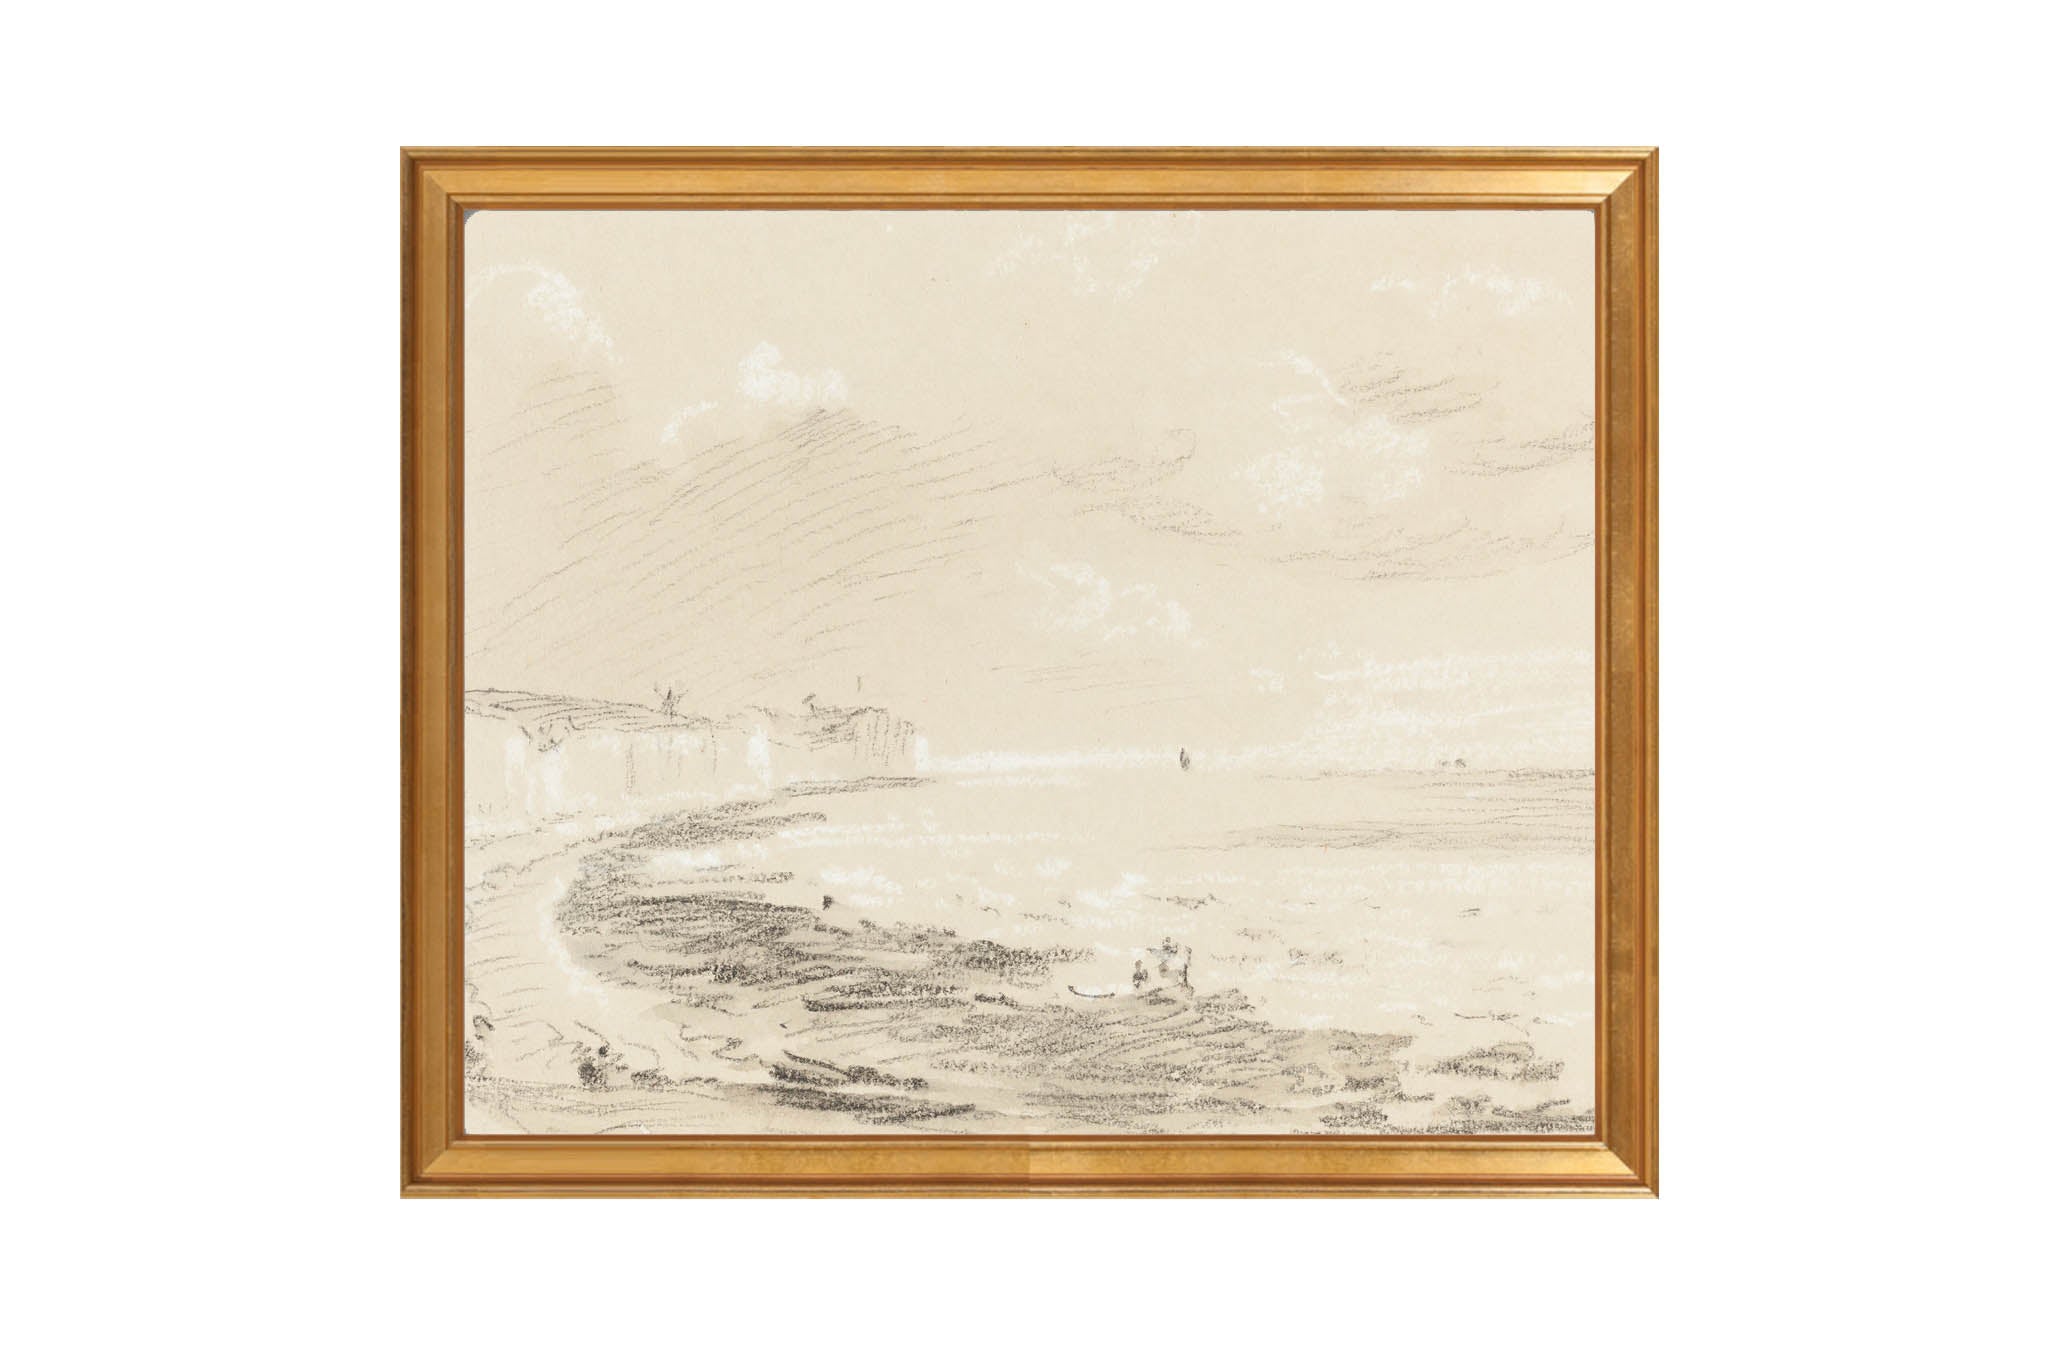 Sketch of the Sea